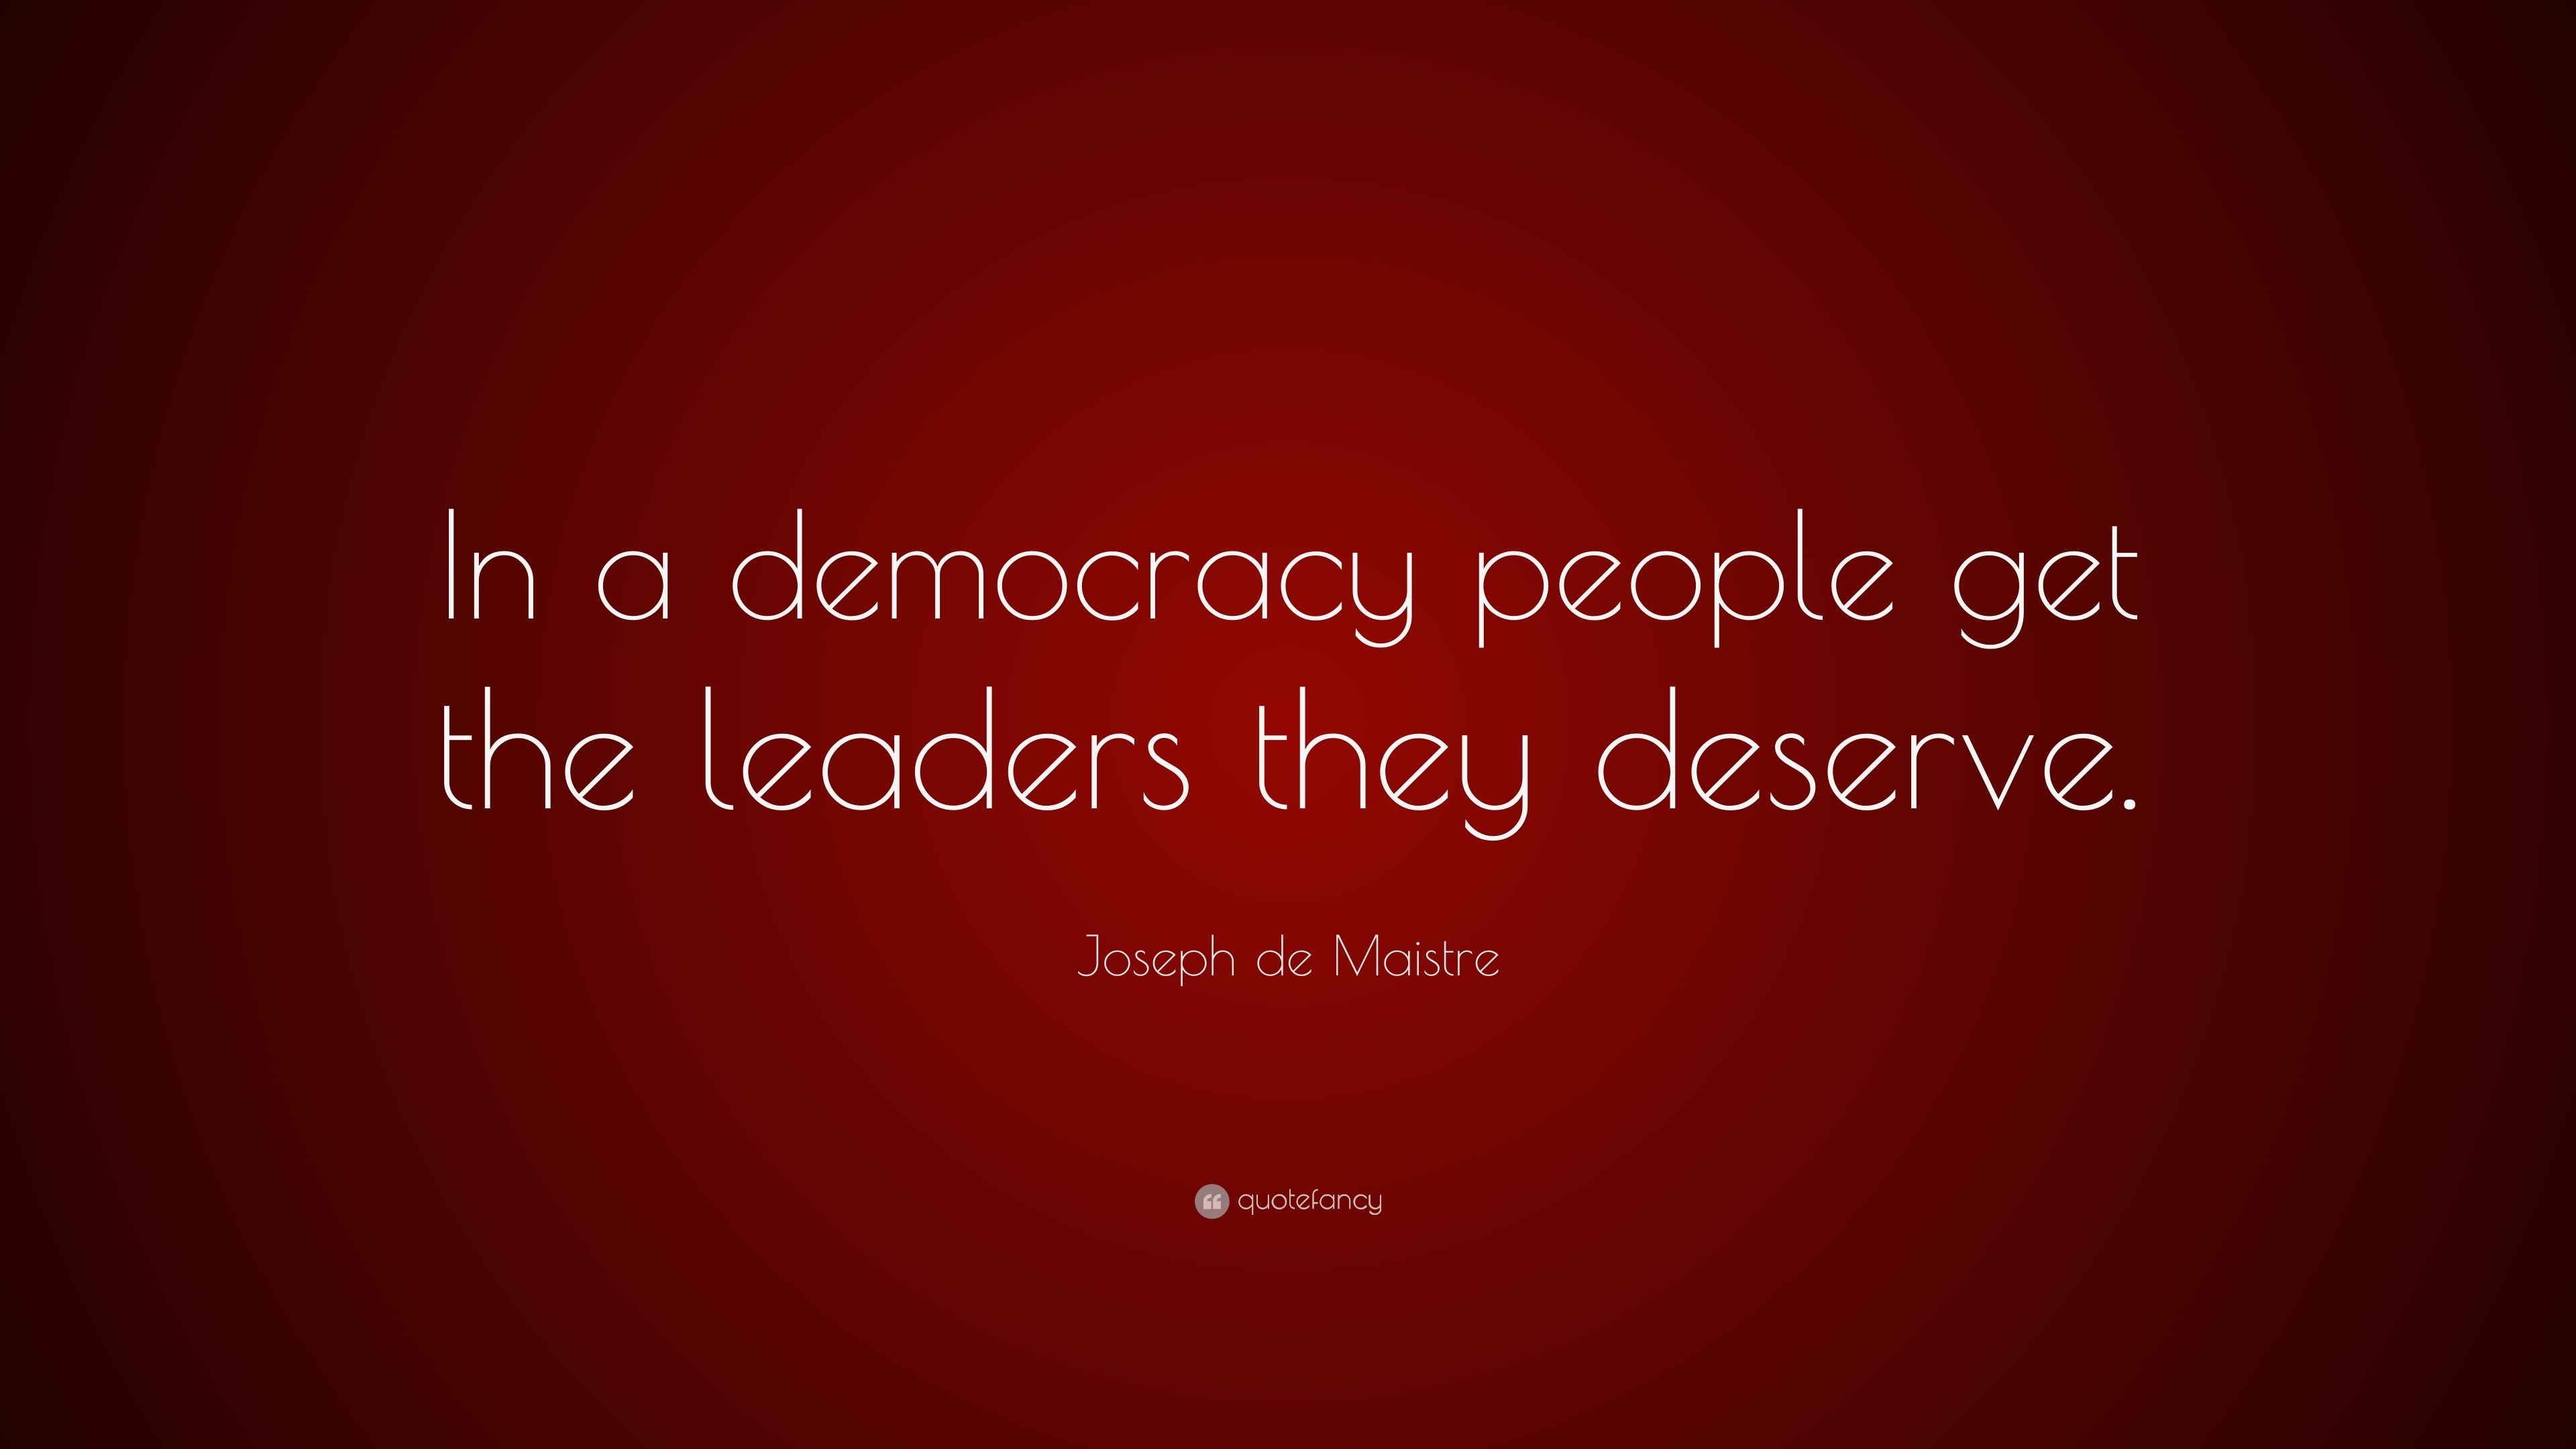 Joseph de Maistre Quote: “In a democracy people get the leaders